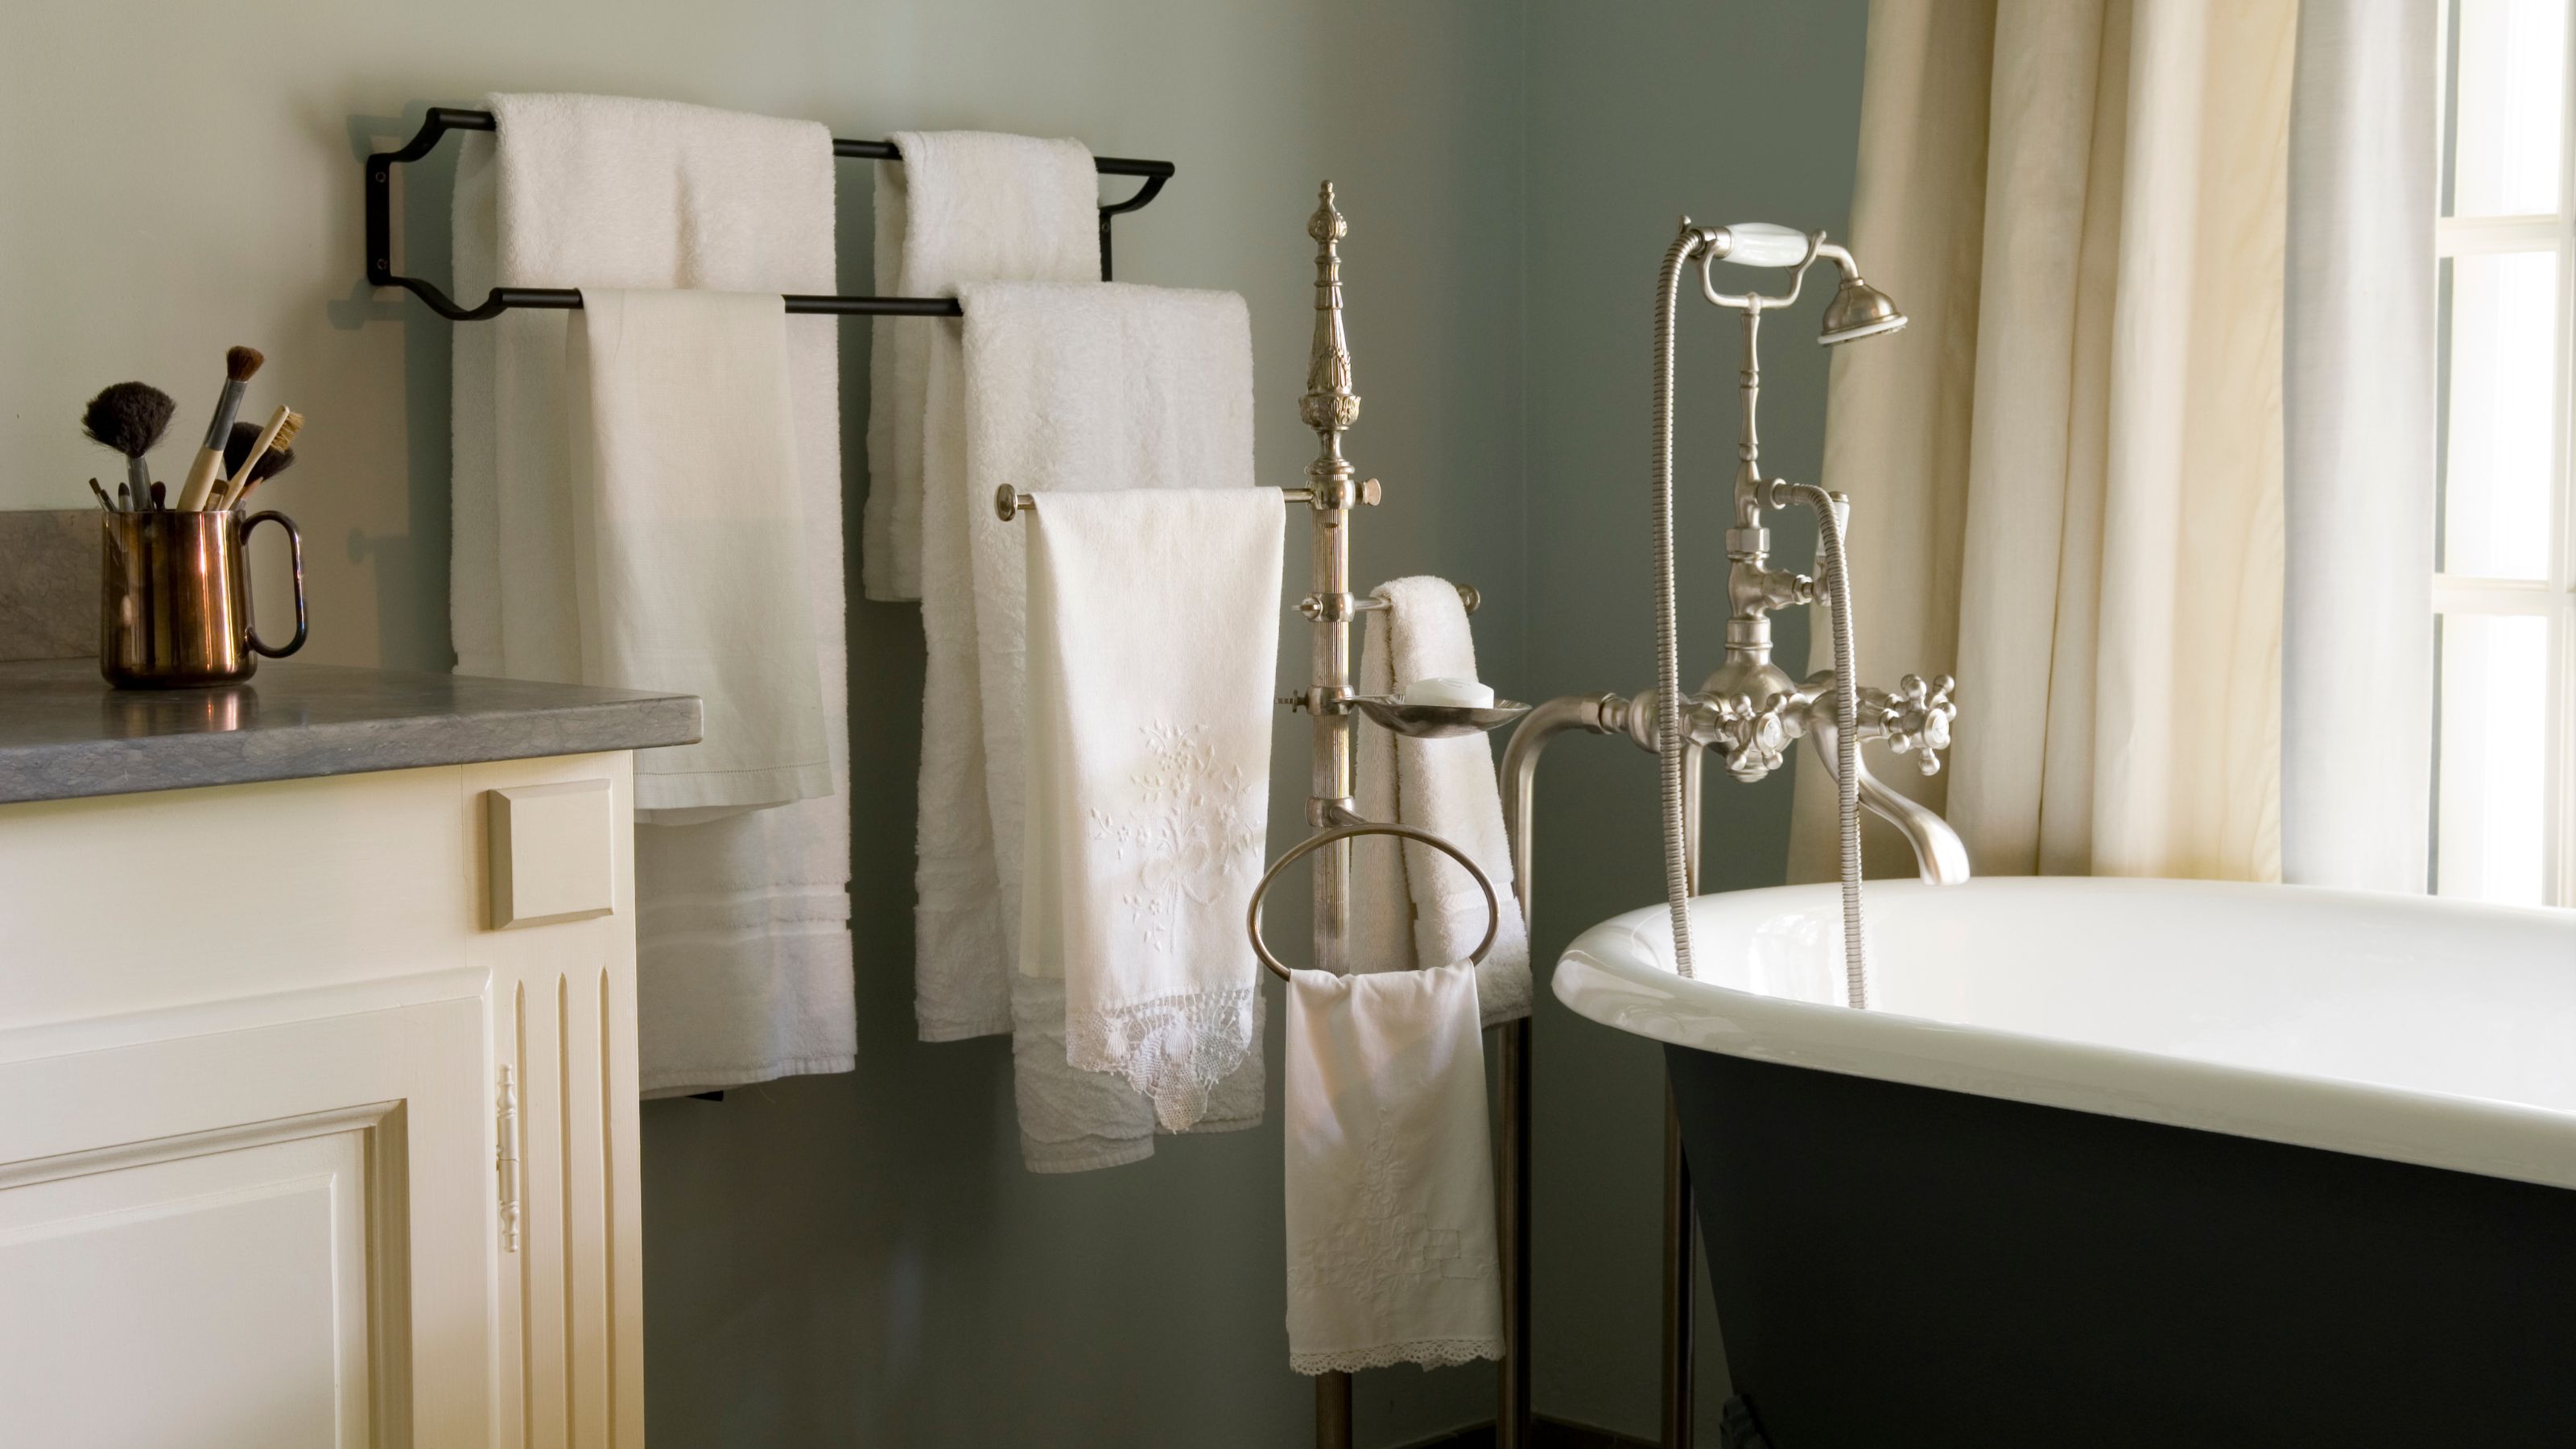 Design Experts Advise Against These Bathroom Towel Colors